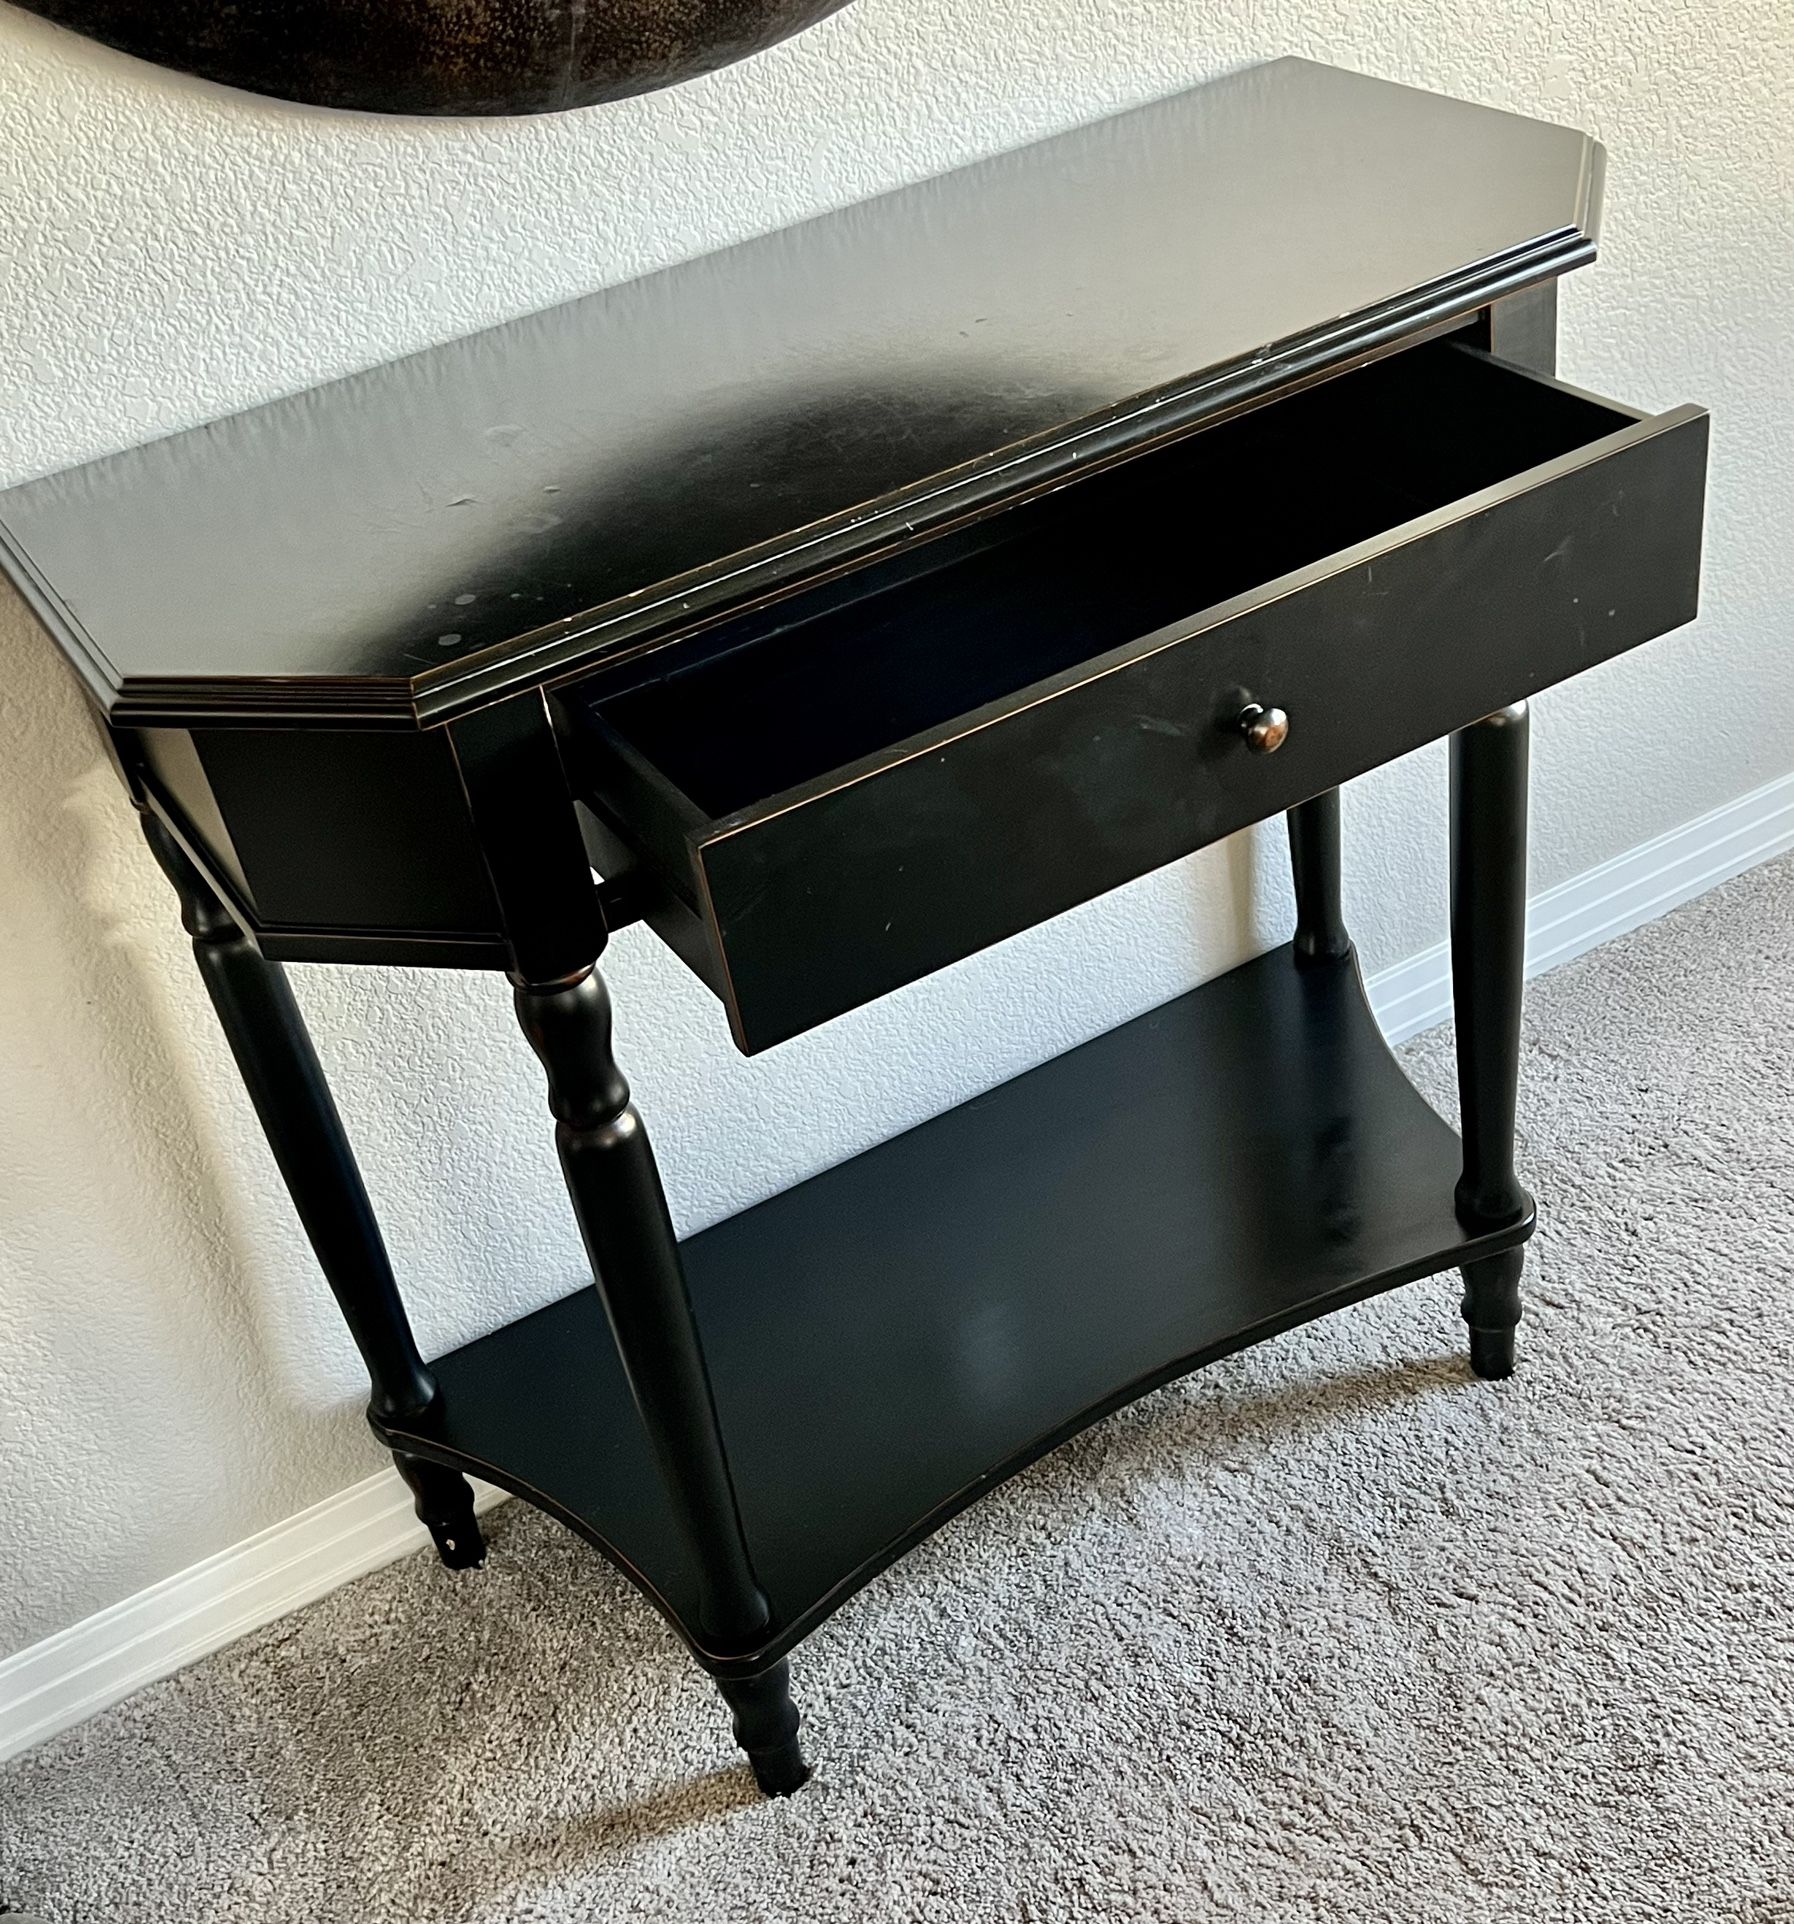 Gorgeous entry hall or console table in a deep burnished espresso. Sleek lines and beautiful legs. Large drawer for storage in addition to shelf for d